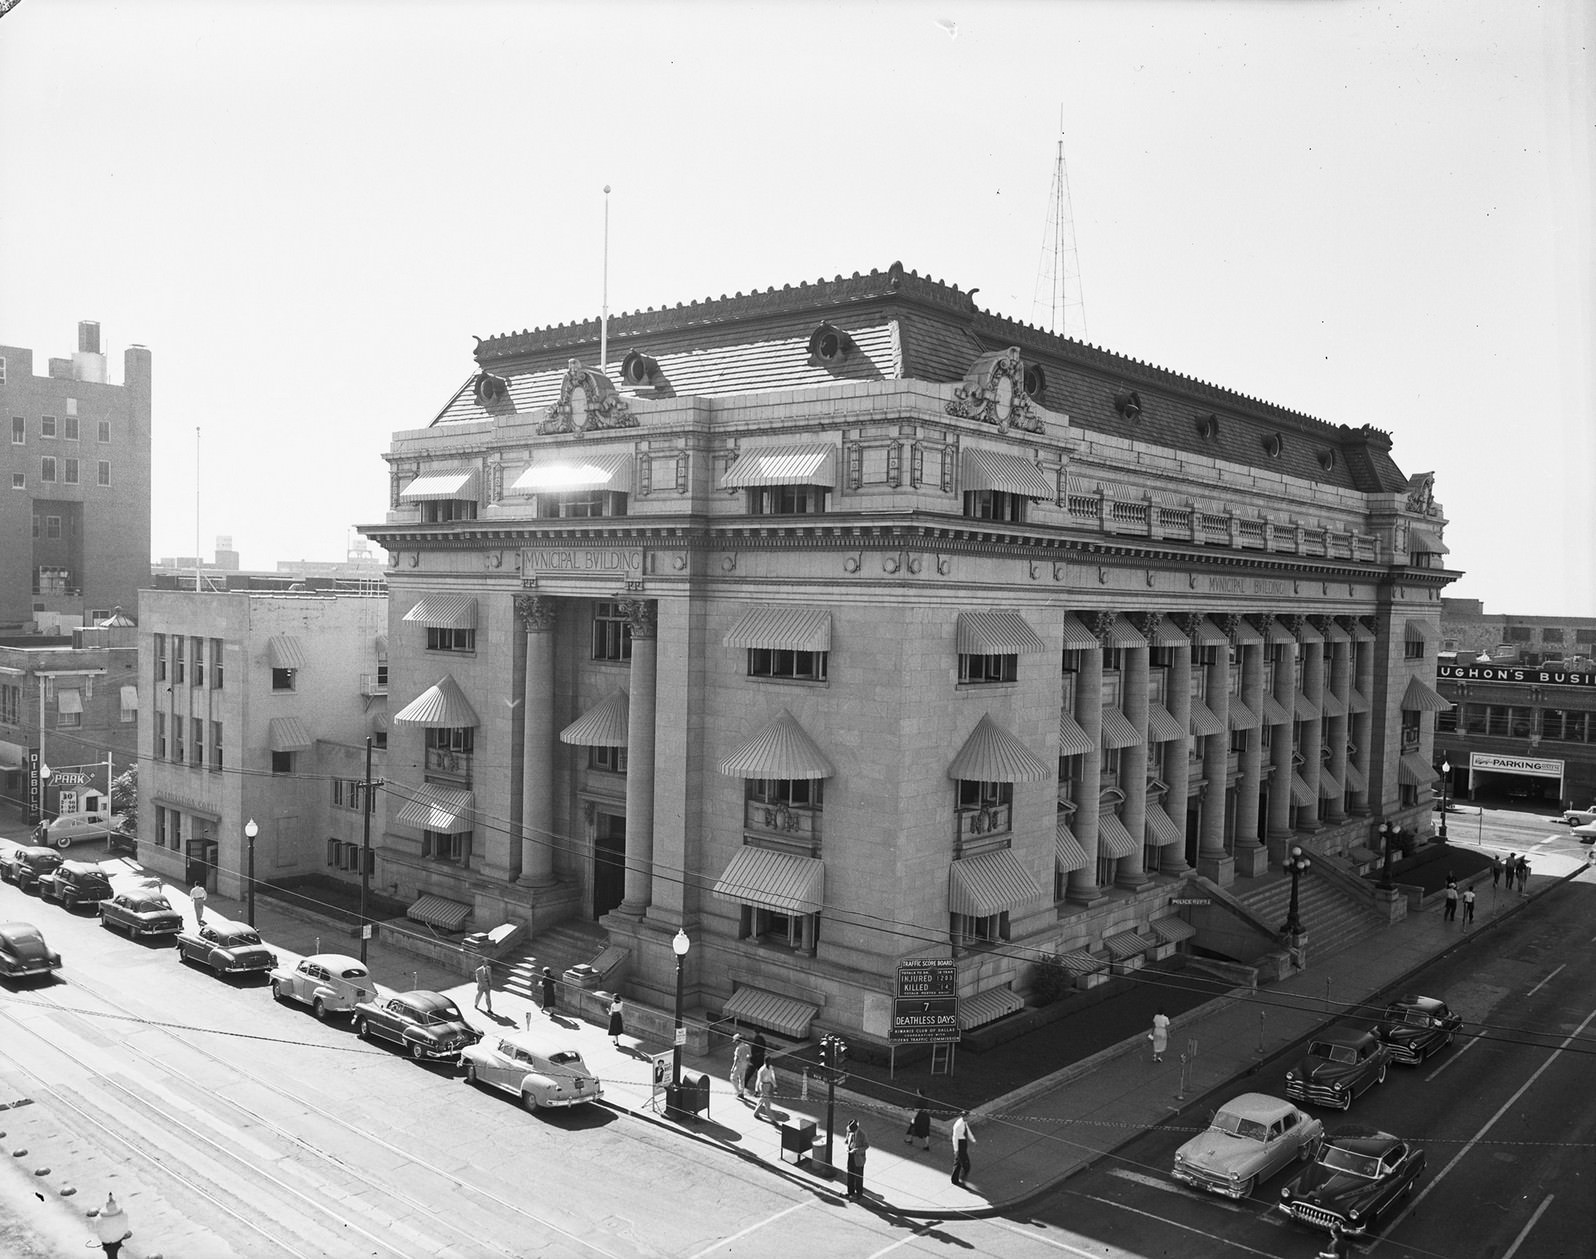 Downtown Dallas with city hall building, 1952